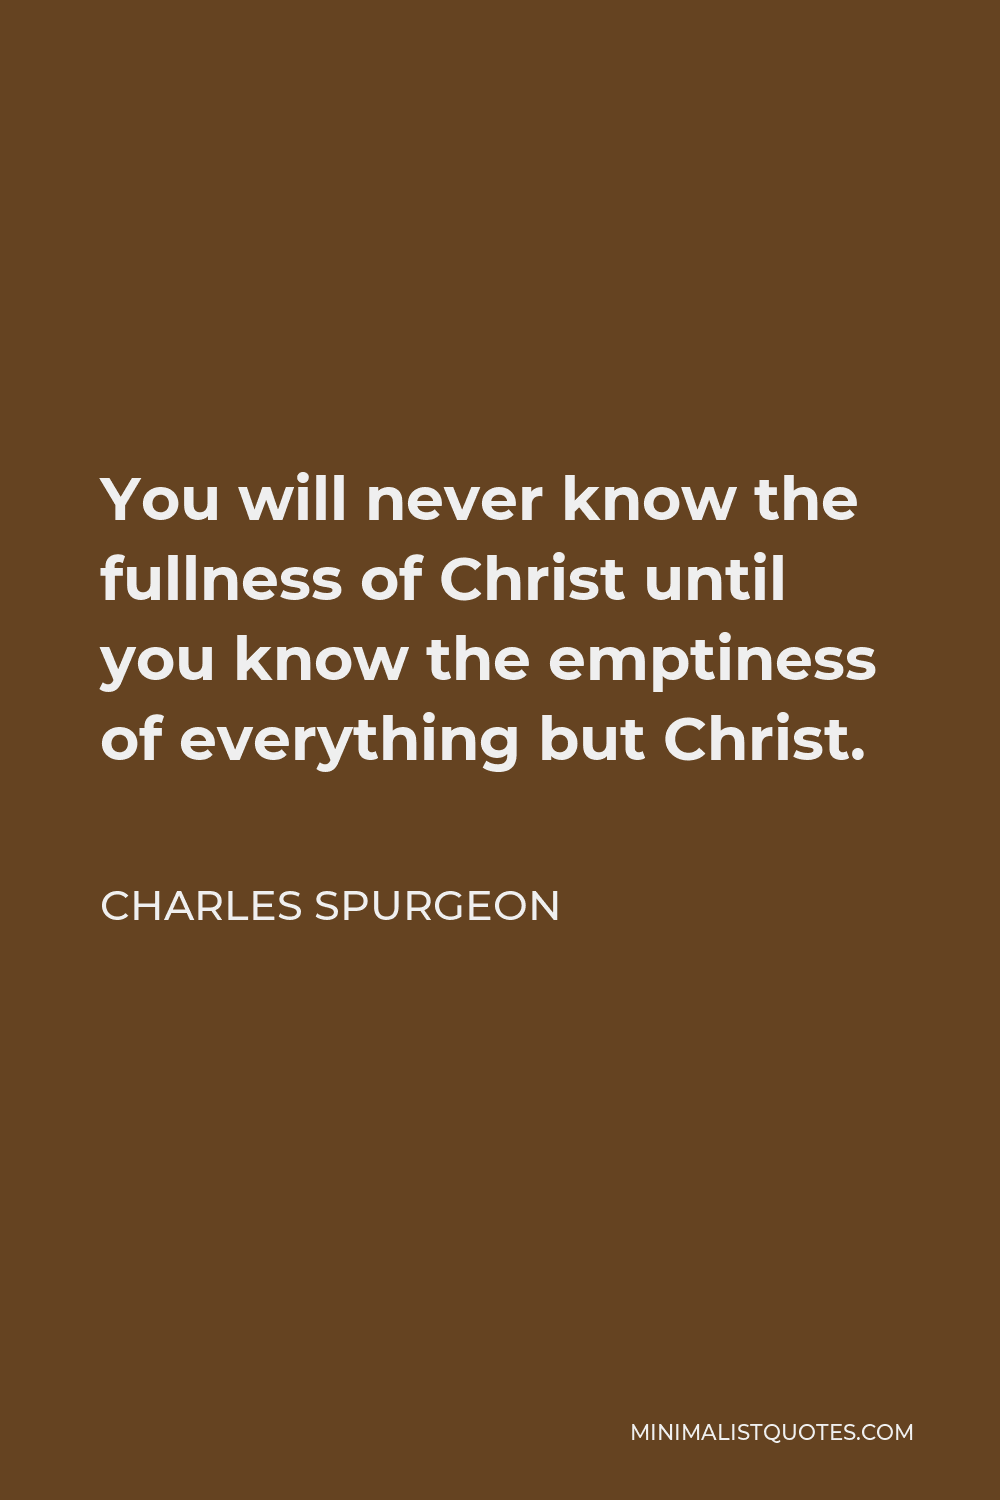 Charles Spurgeon Quote - You will never know the fullness of Christ until you know the emptiness of everything but Christ.